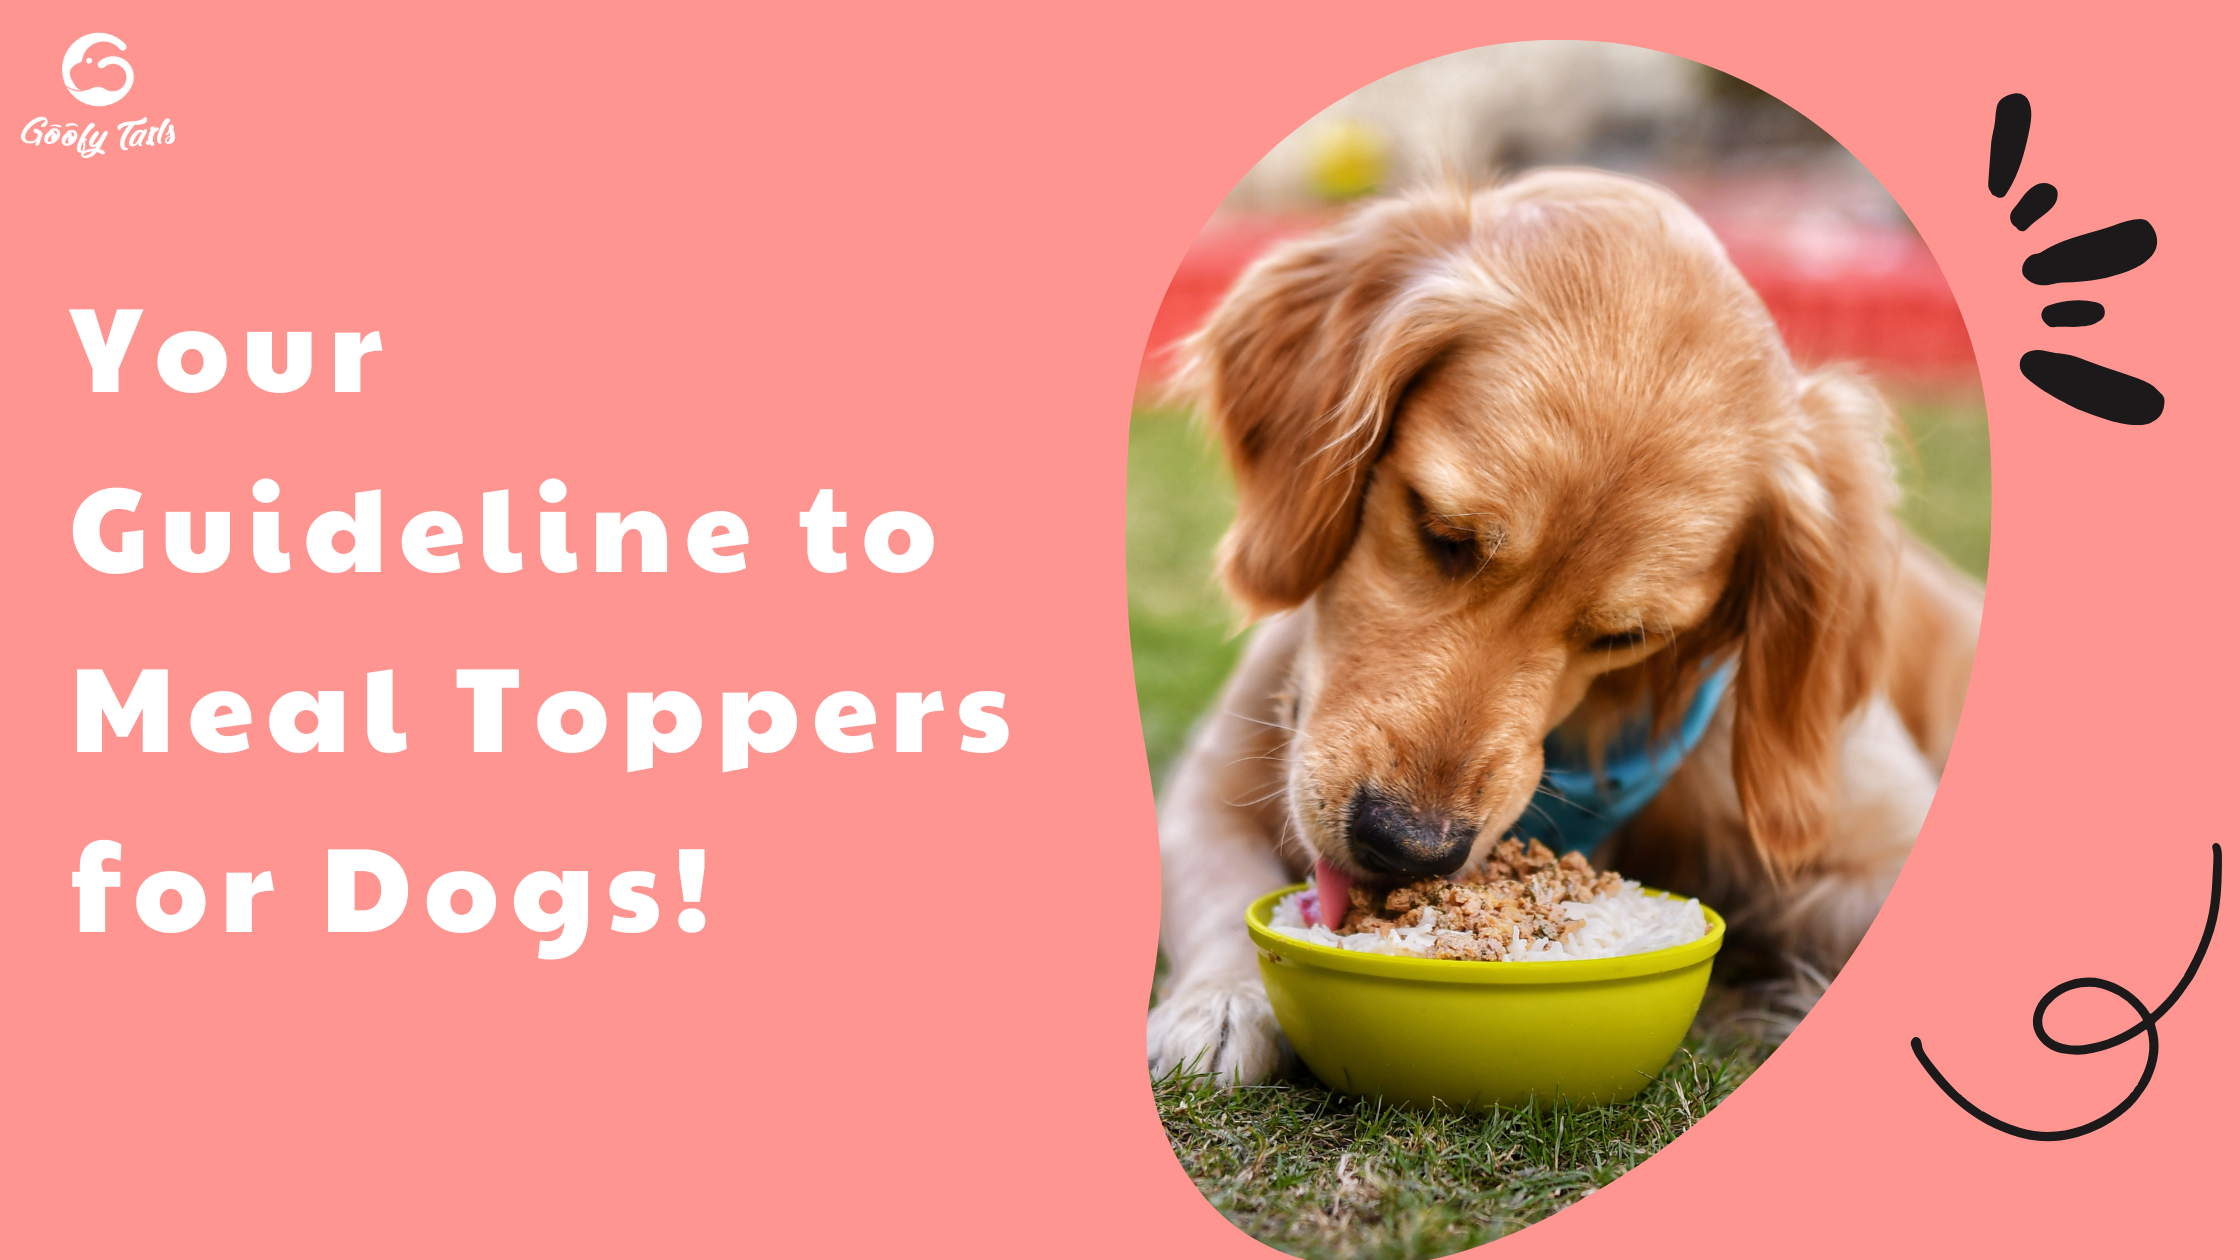 Your Guideline to Meal Toppers for Dogs!